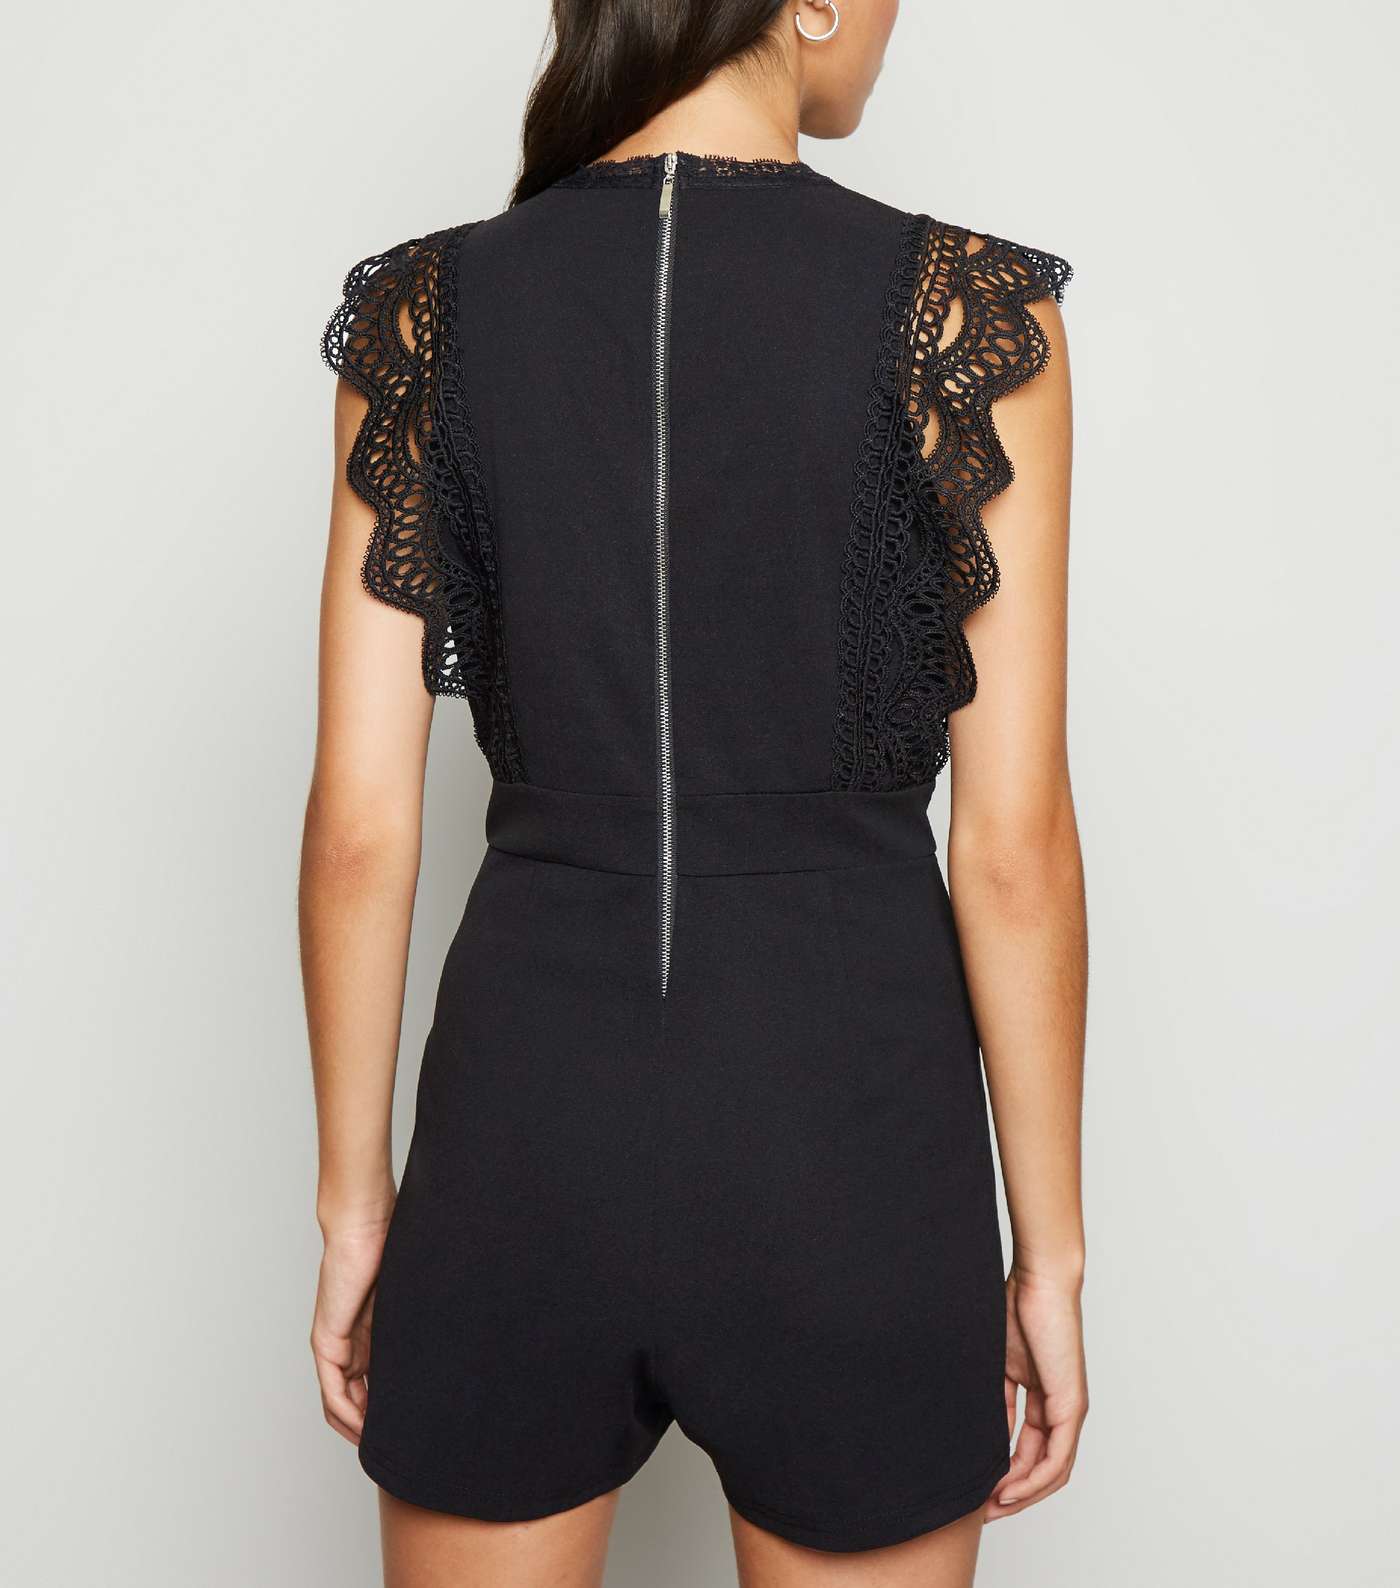 Cameo Rose Black Lace Crochet Sleeve Playsuit Image 3